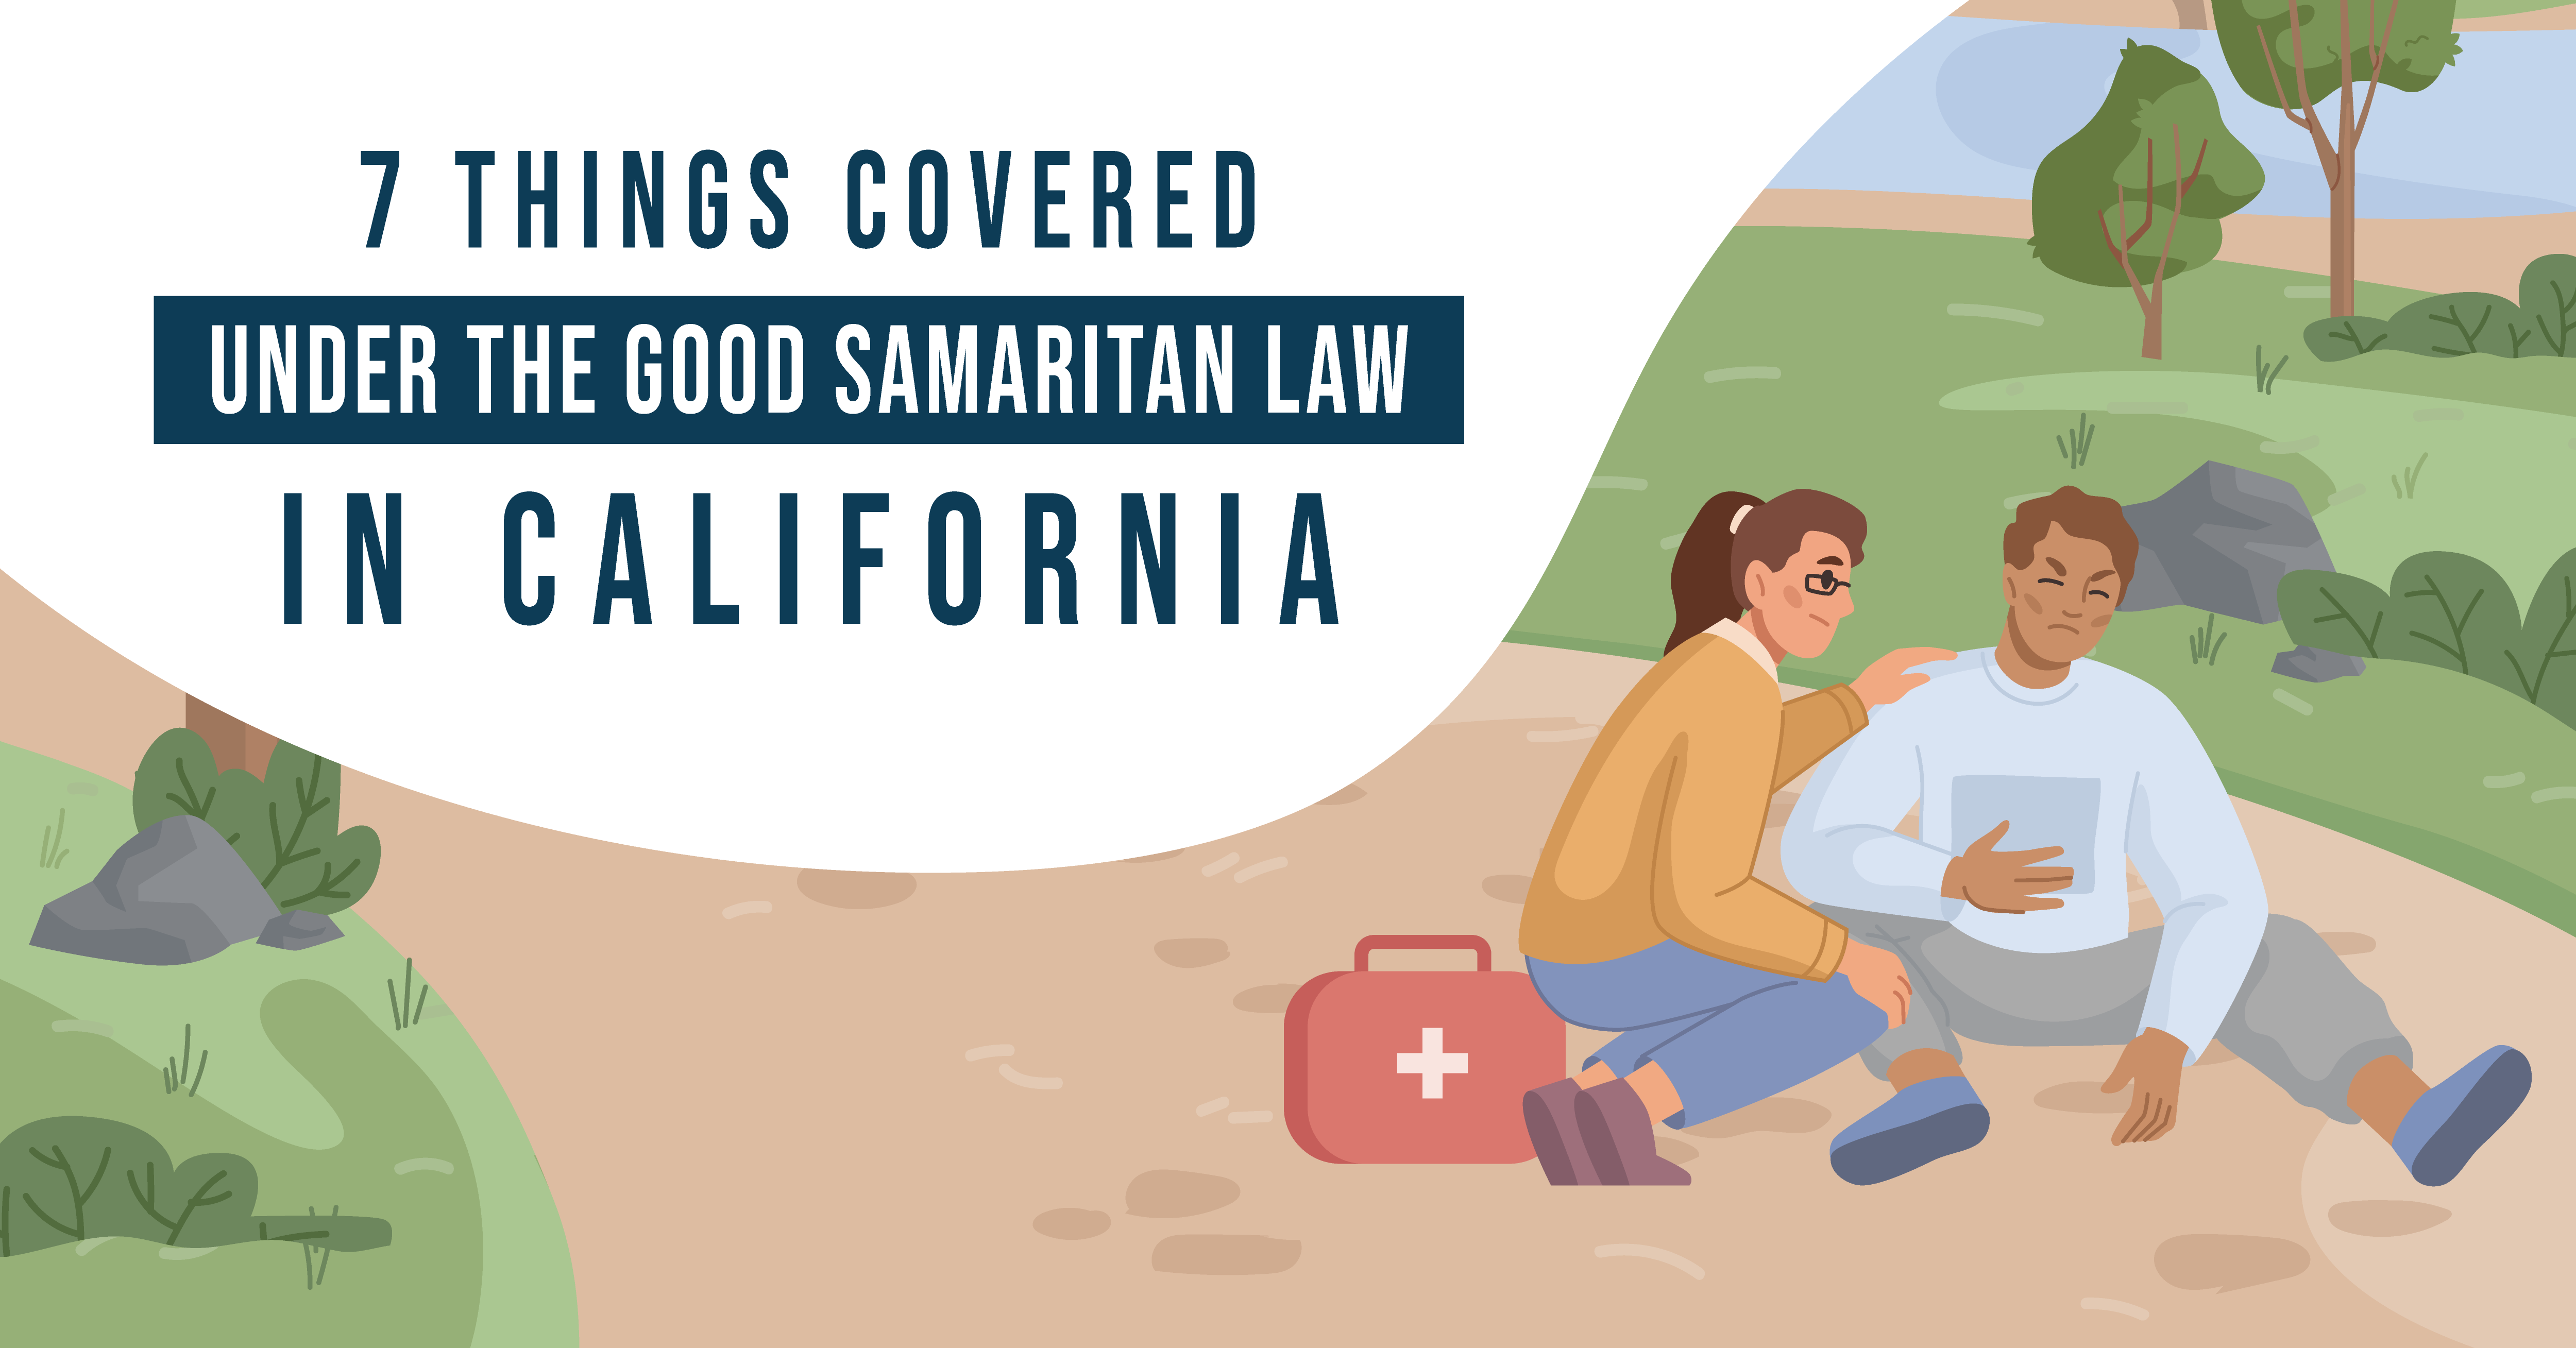 7 Things Covered Under the Good Samaritan Law in California